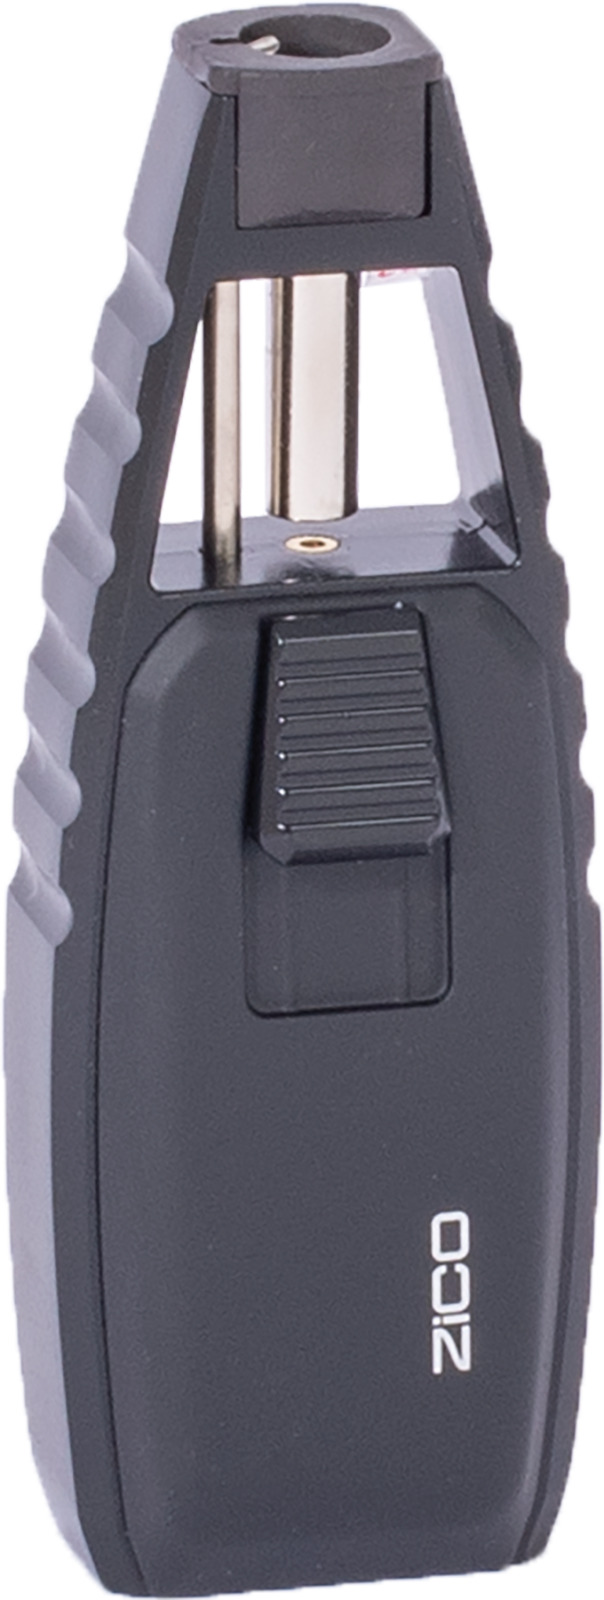 Zico Single Torch Flame Lighter ZD60